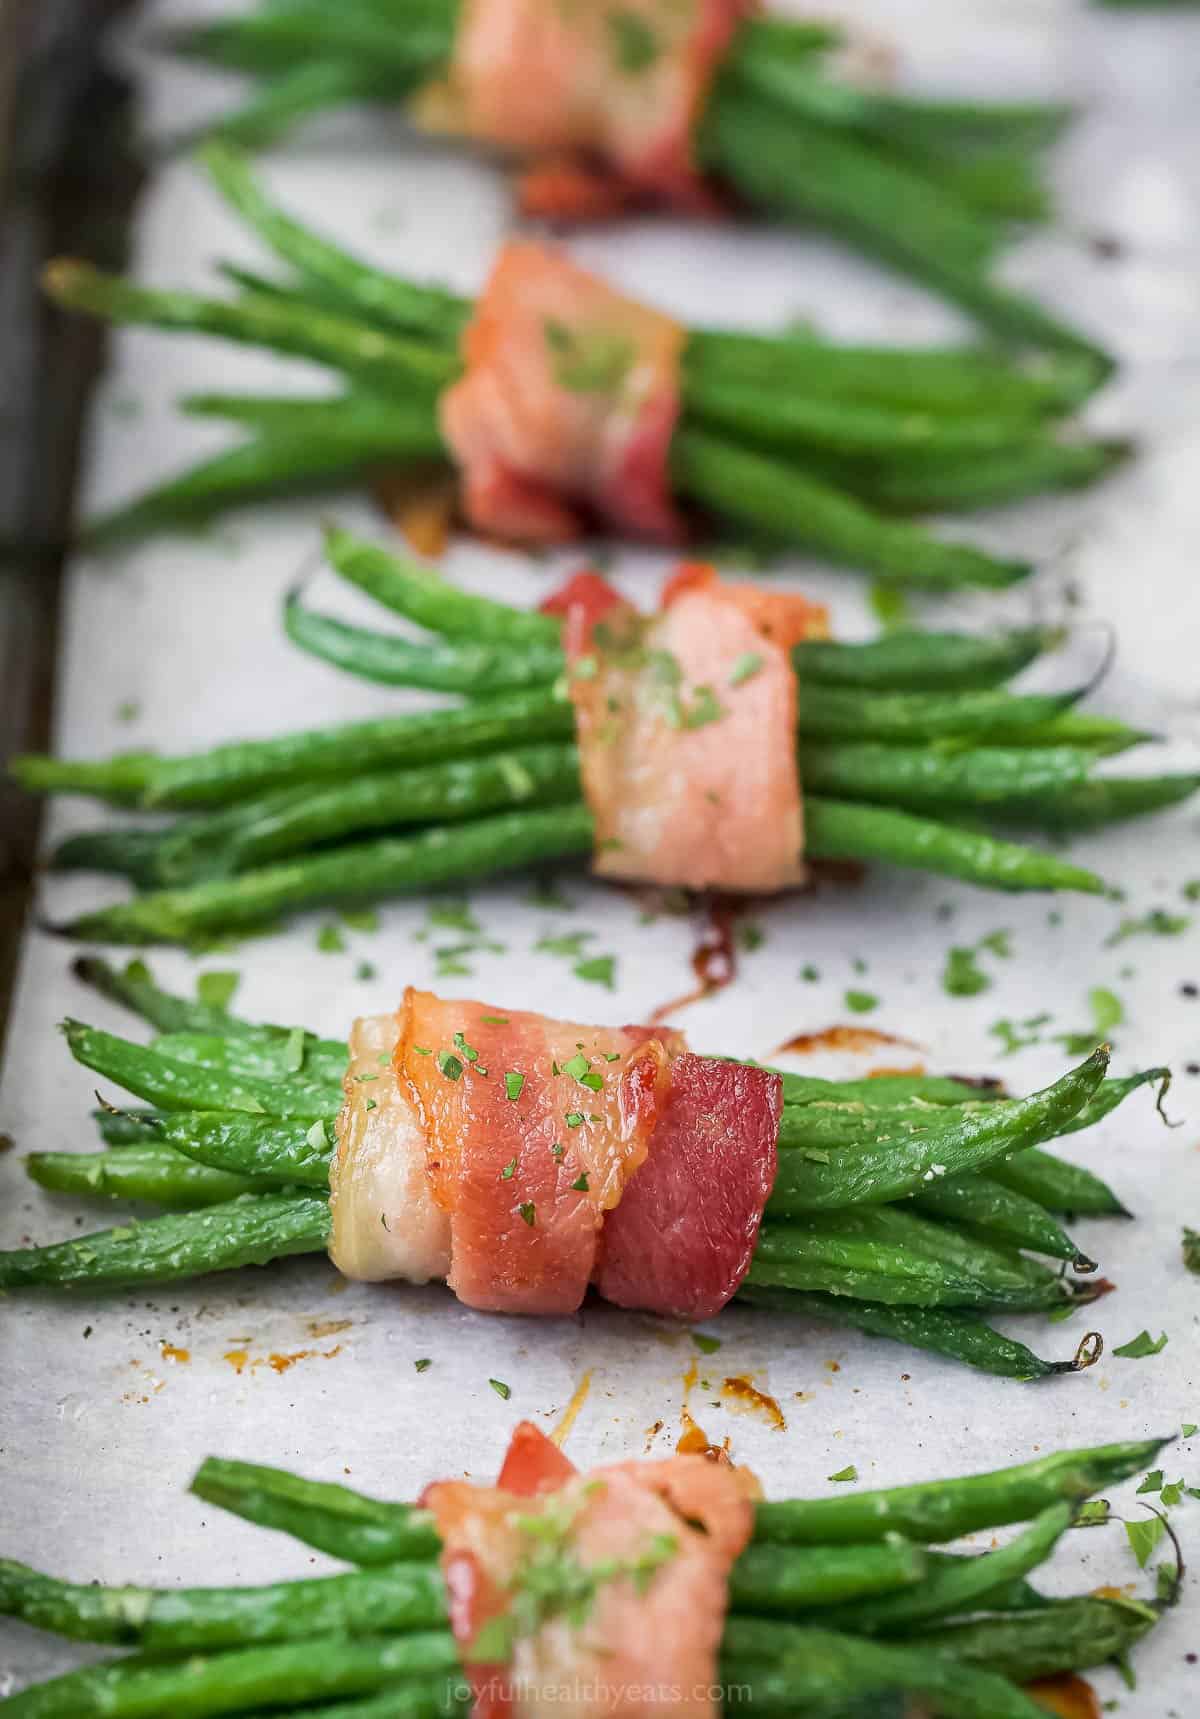 A row of bacon-wrapped green beans on a lined baking sheet with finely chopped parsley sprinkled on top